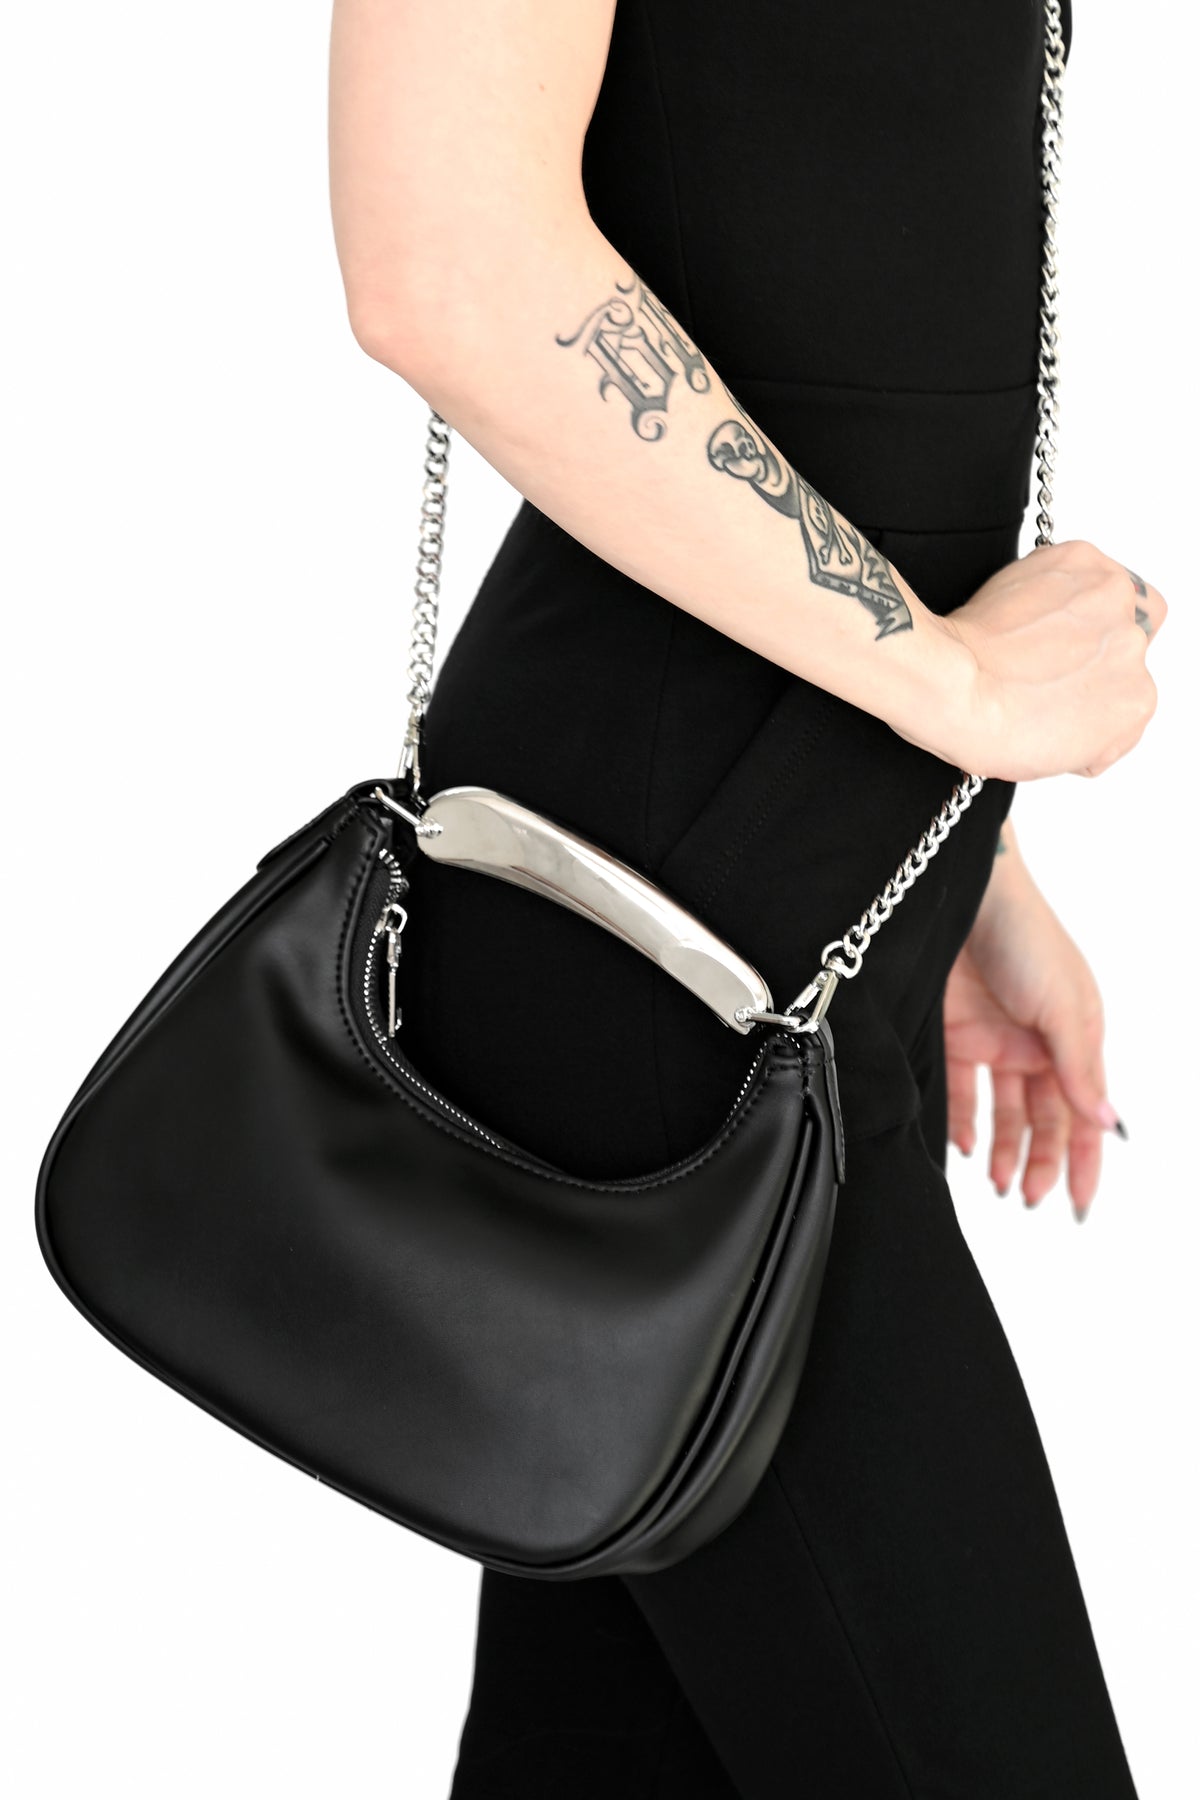 black faux leather purse with a chunky silver plated top handle and chain crossbody strap